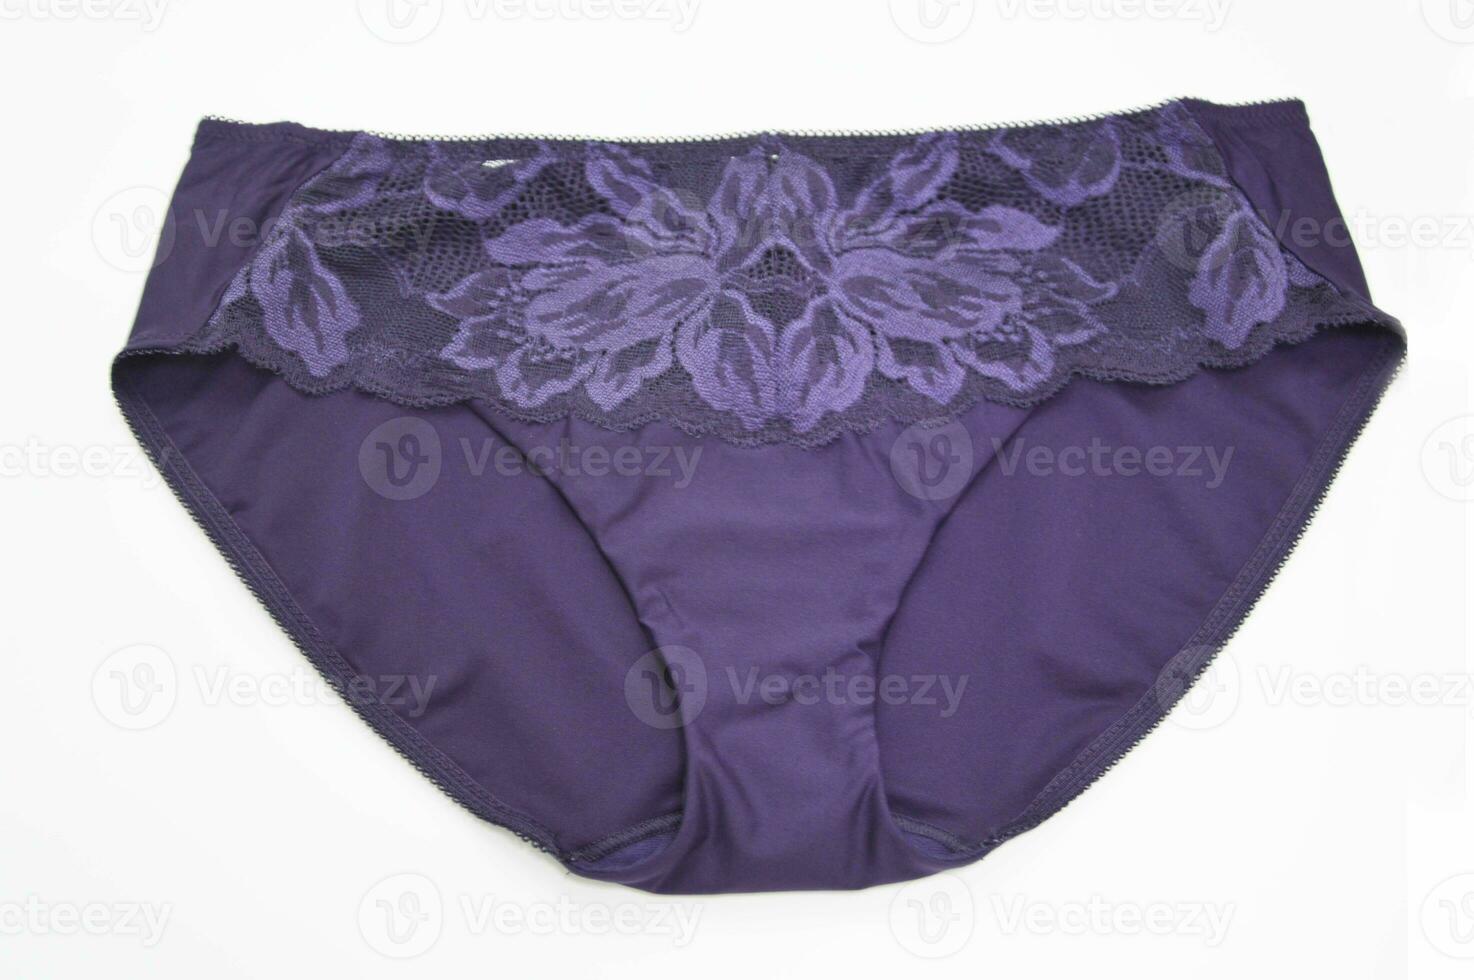 https://static.vecteezy.com/system/resources/previews/036/081/993/non_2x/lingerie-top-view-of-women-s-purple-lilac-lace-panties-on-a-white-background-sexy-colored-women-s-underwear-photo.jpg